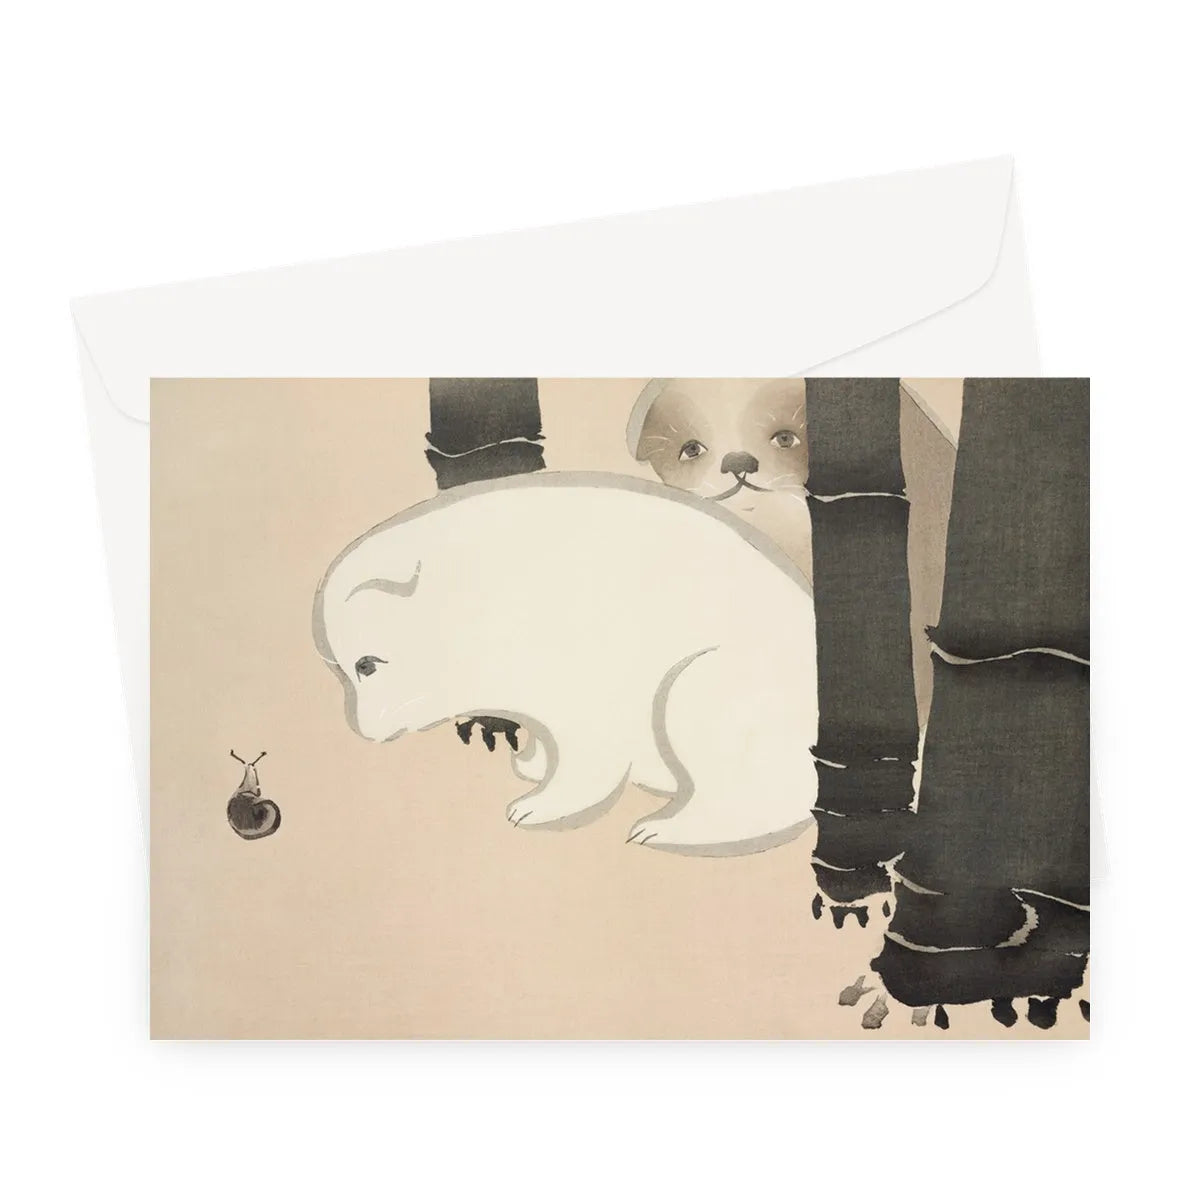 Dog And Snail By Kamisaka Sekka Greeting Card - A5 Landscape / 1 Card - Greeting & Note Cards - Aesthetic Art